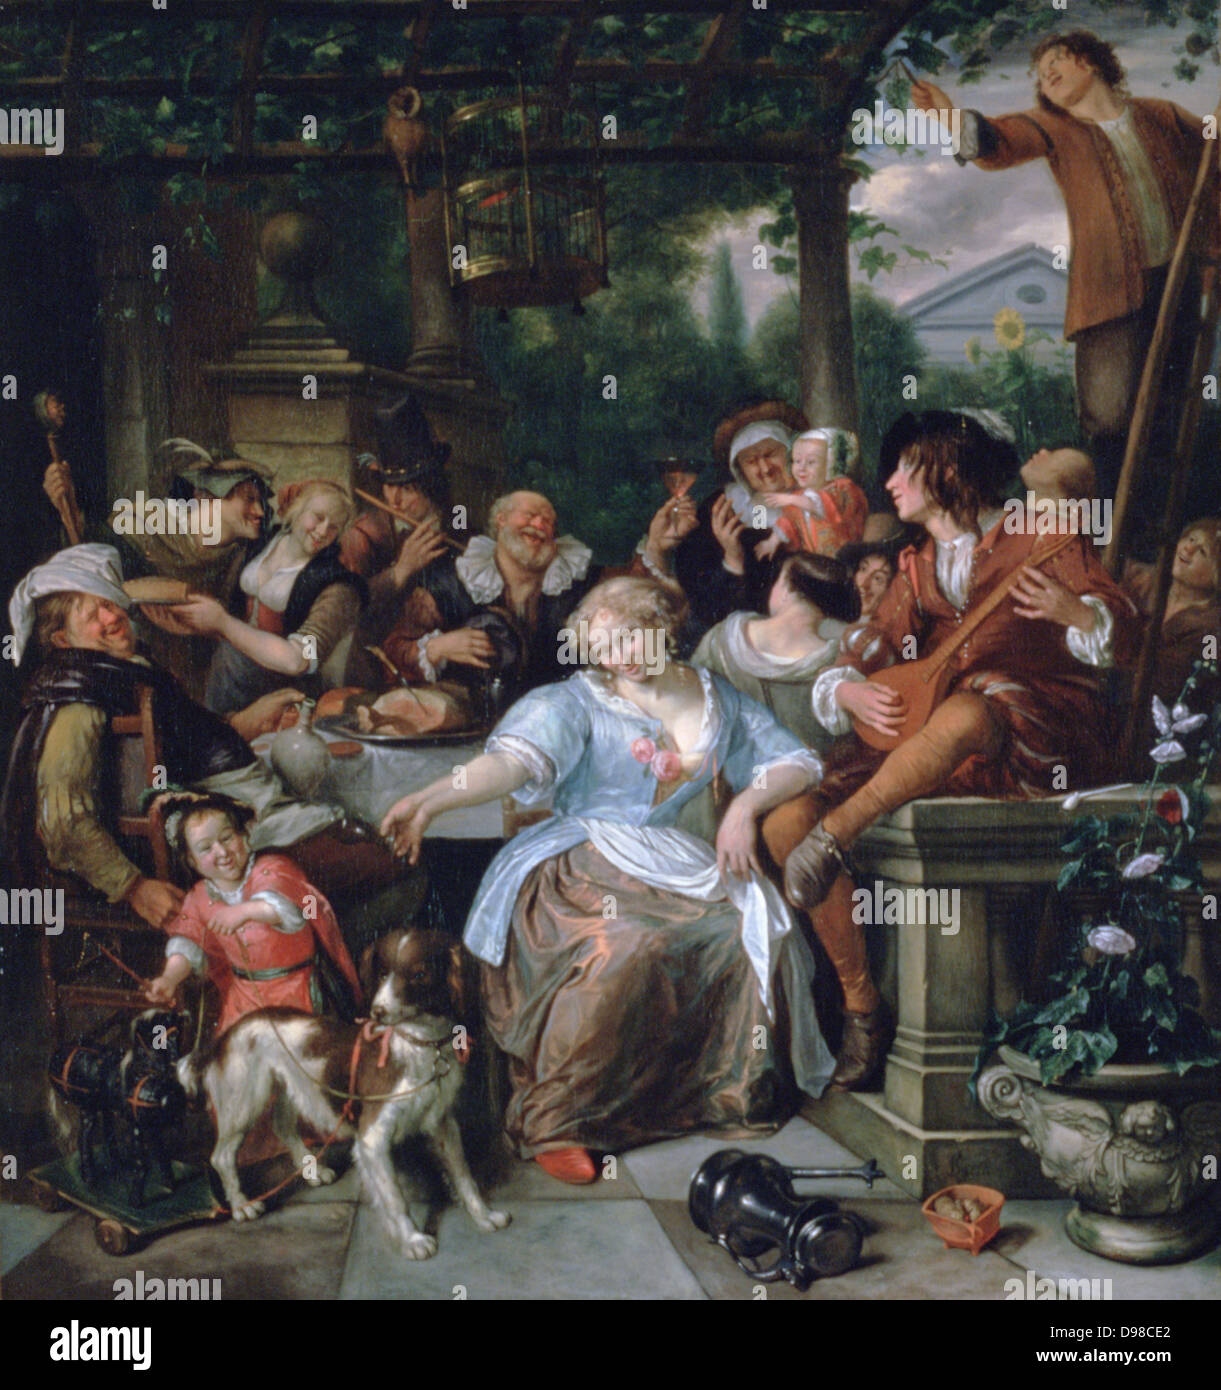 Merry Company on a Terrace': Group eating and drinking in the open air under a pergola from which hangs a bird in a cage. Pet dog harnessed to child's wheeled toy. Young men play flute and mandolin. Jan Steen (1626-1679) Dutch painter. Stock Photo